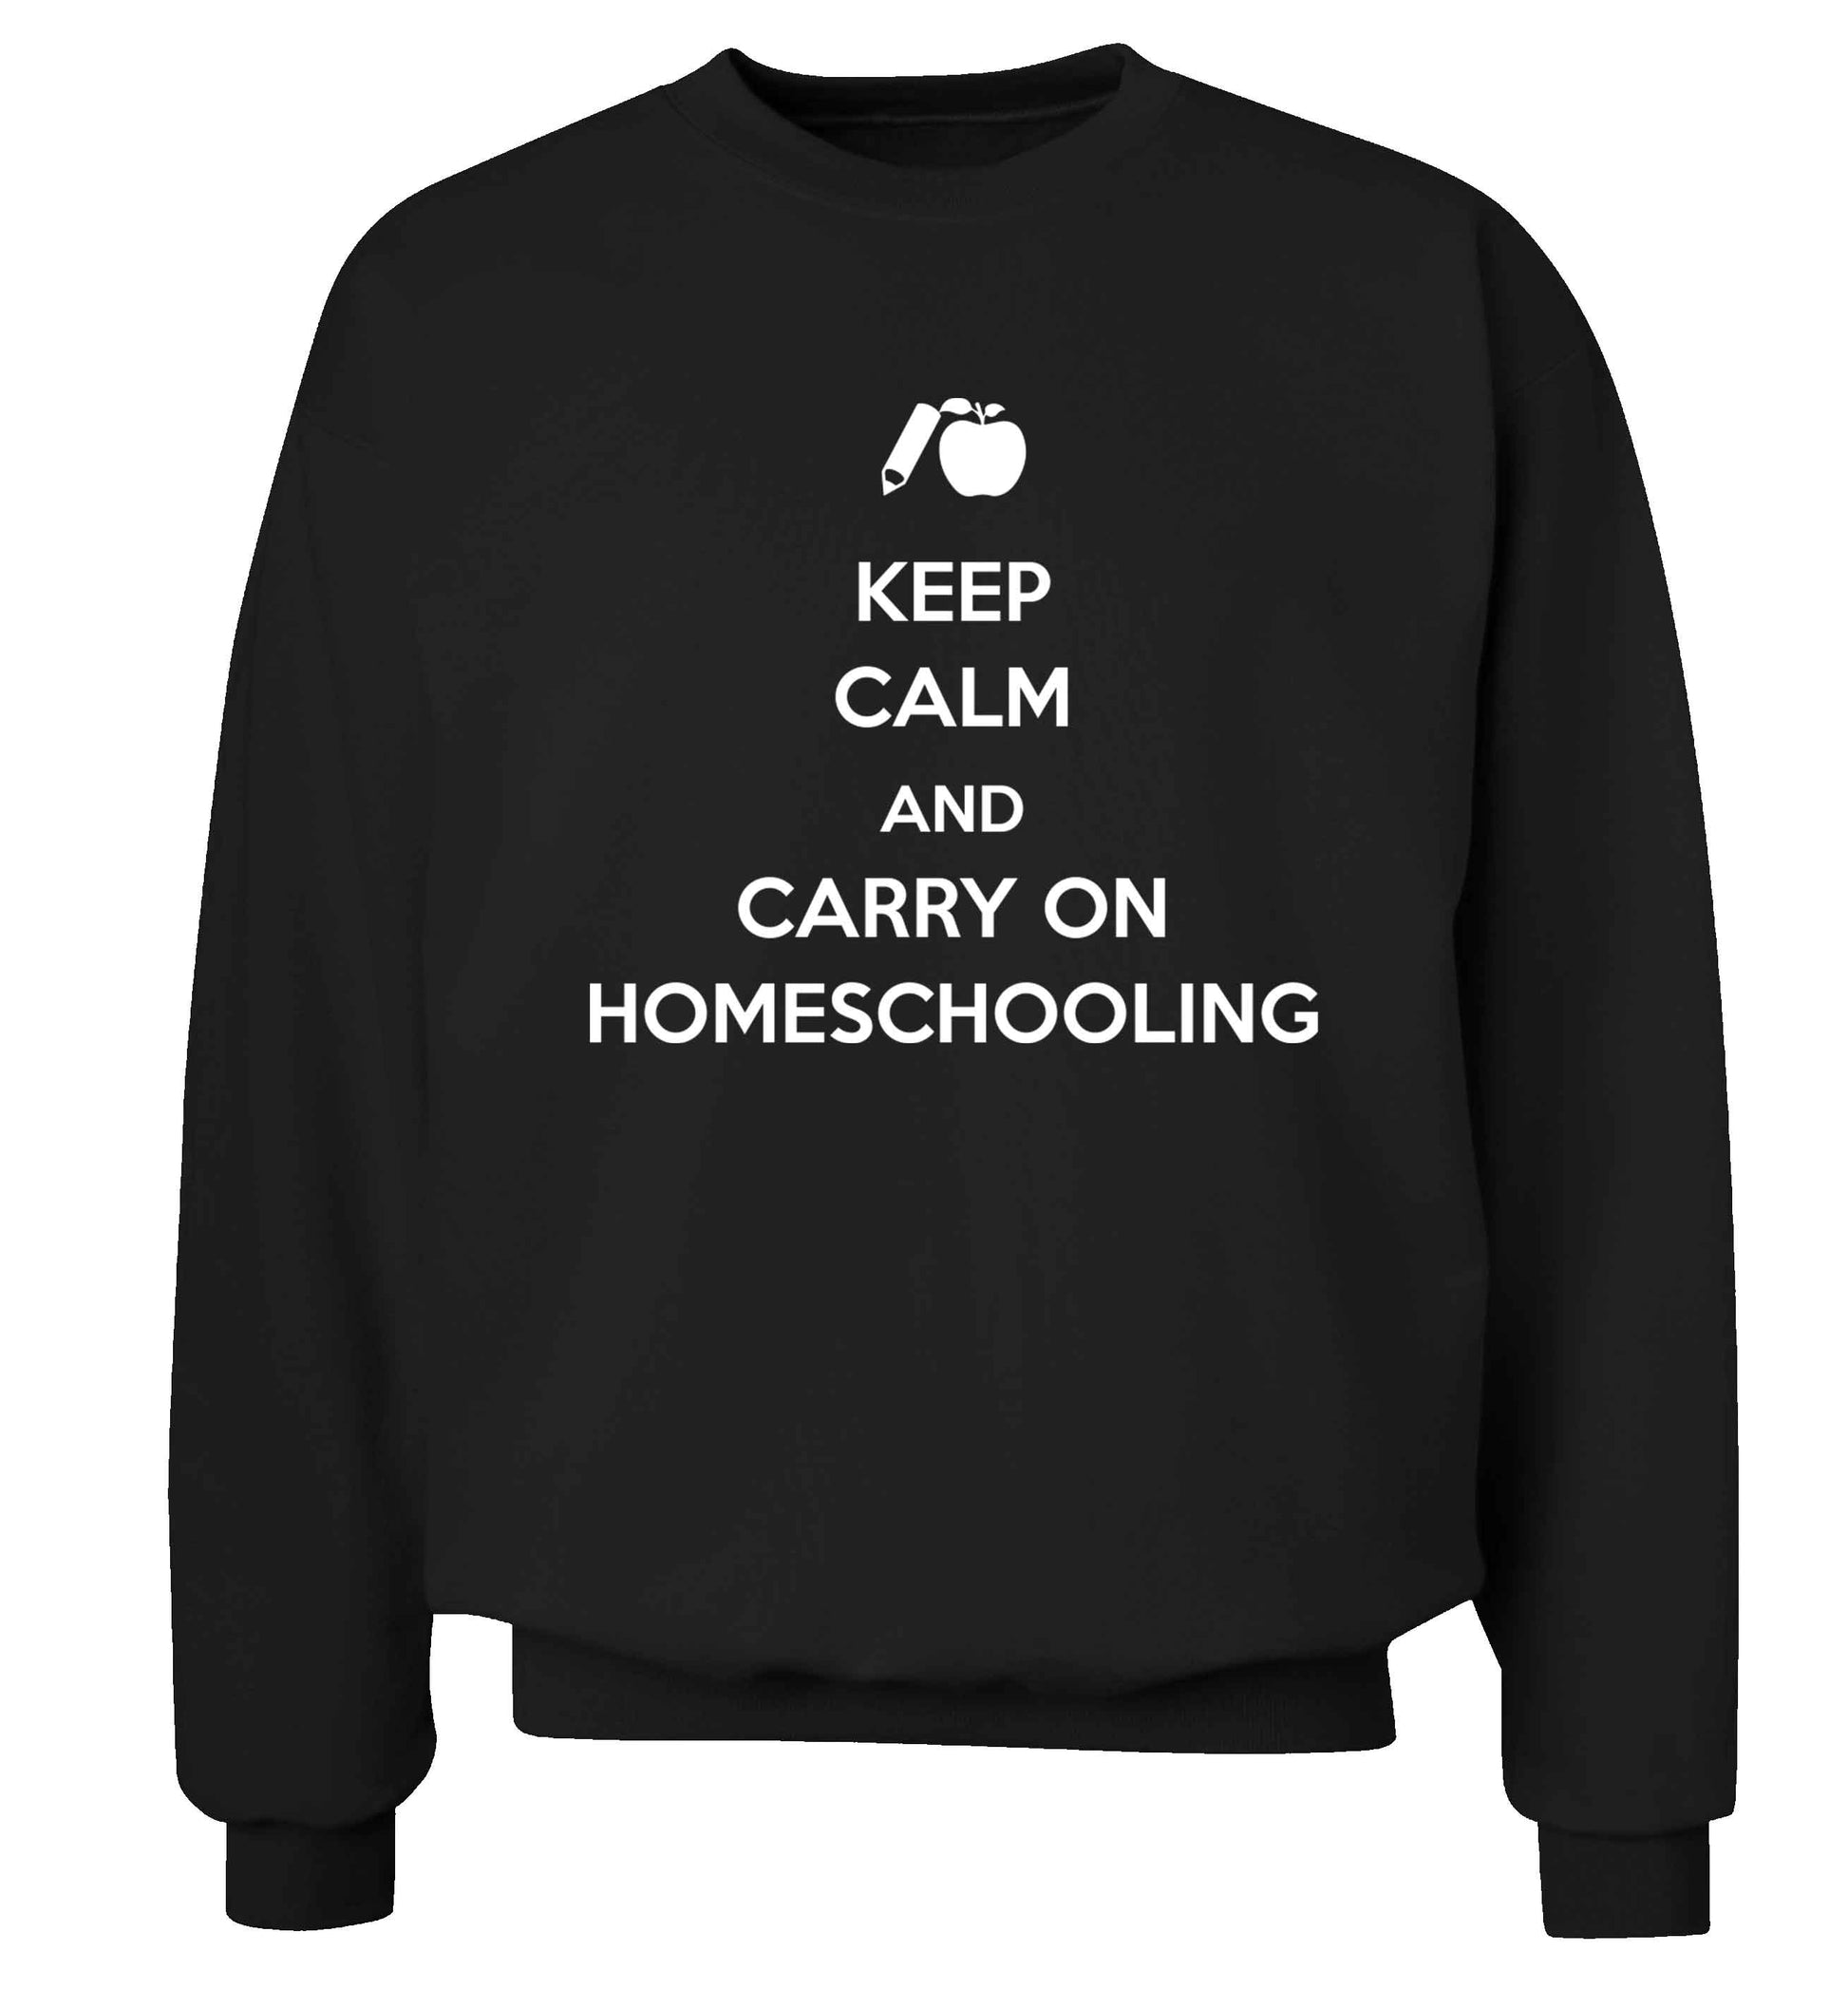 Keep calm and carry on homeschooling Adult's unisex black Sweater 2XL